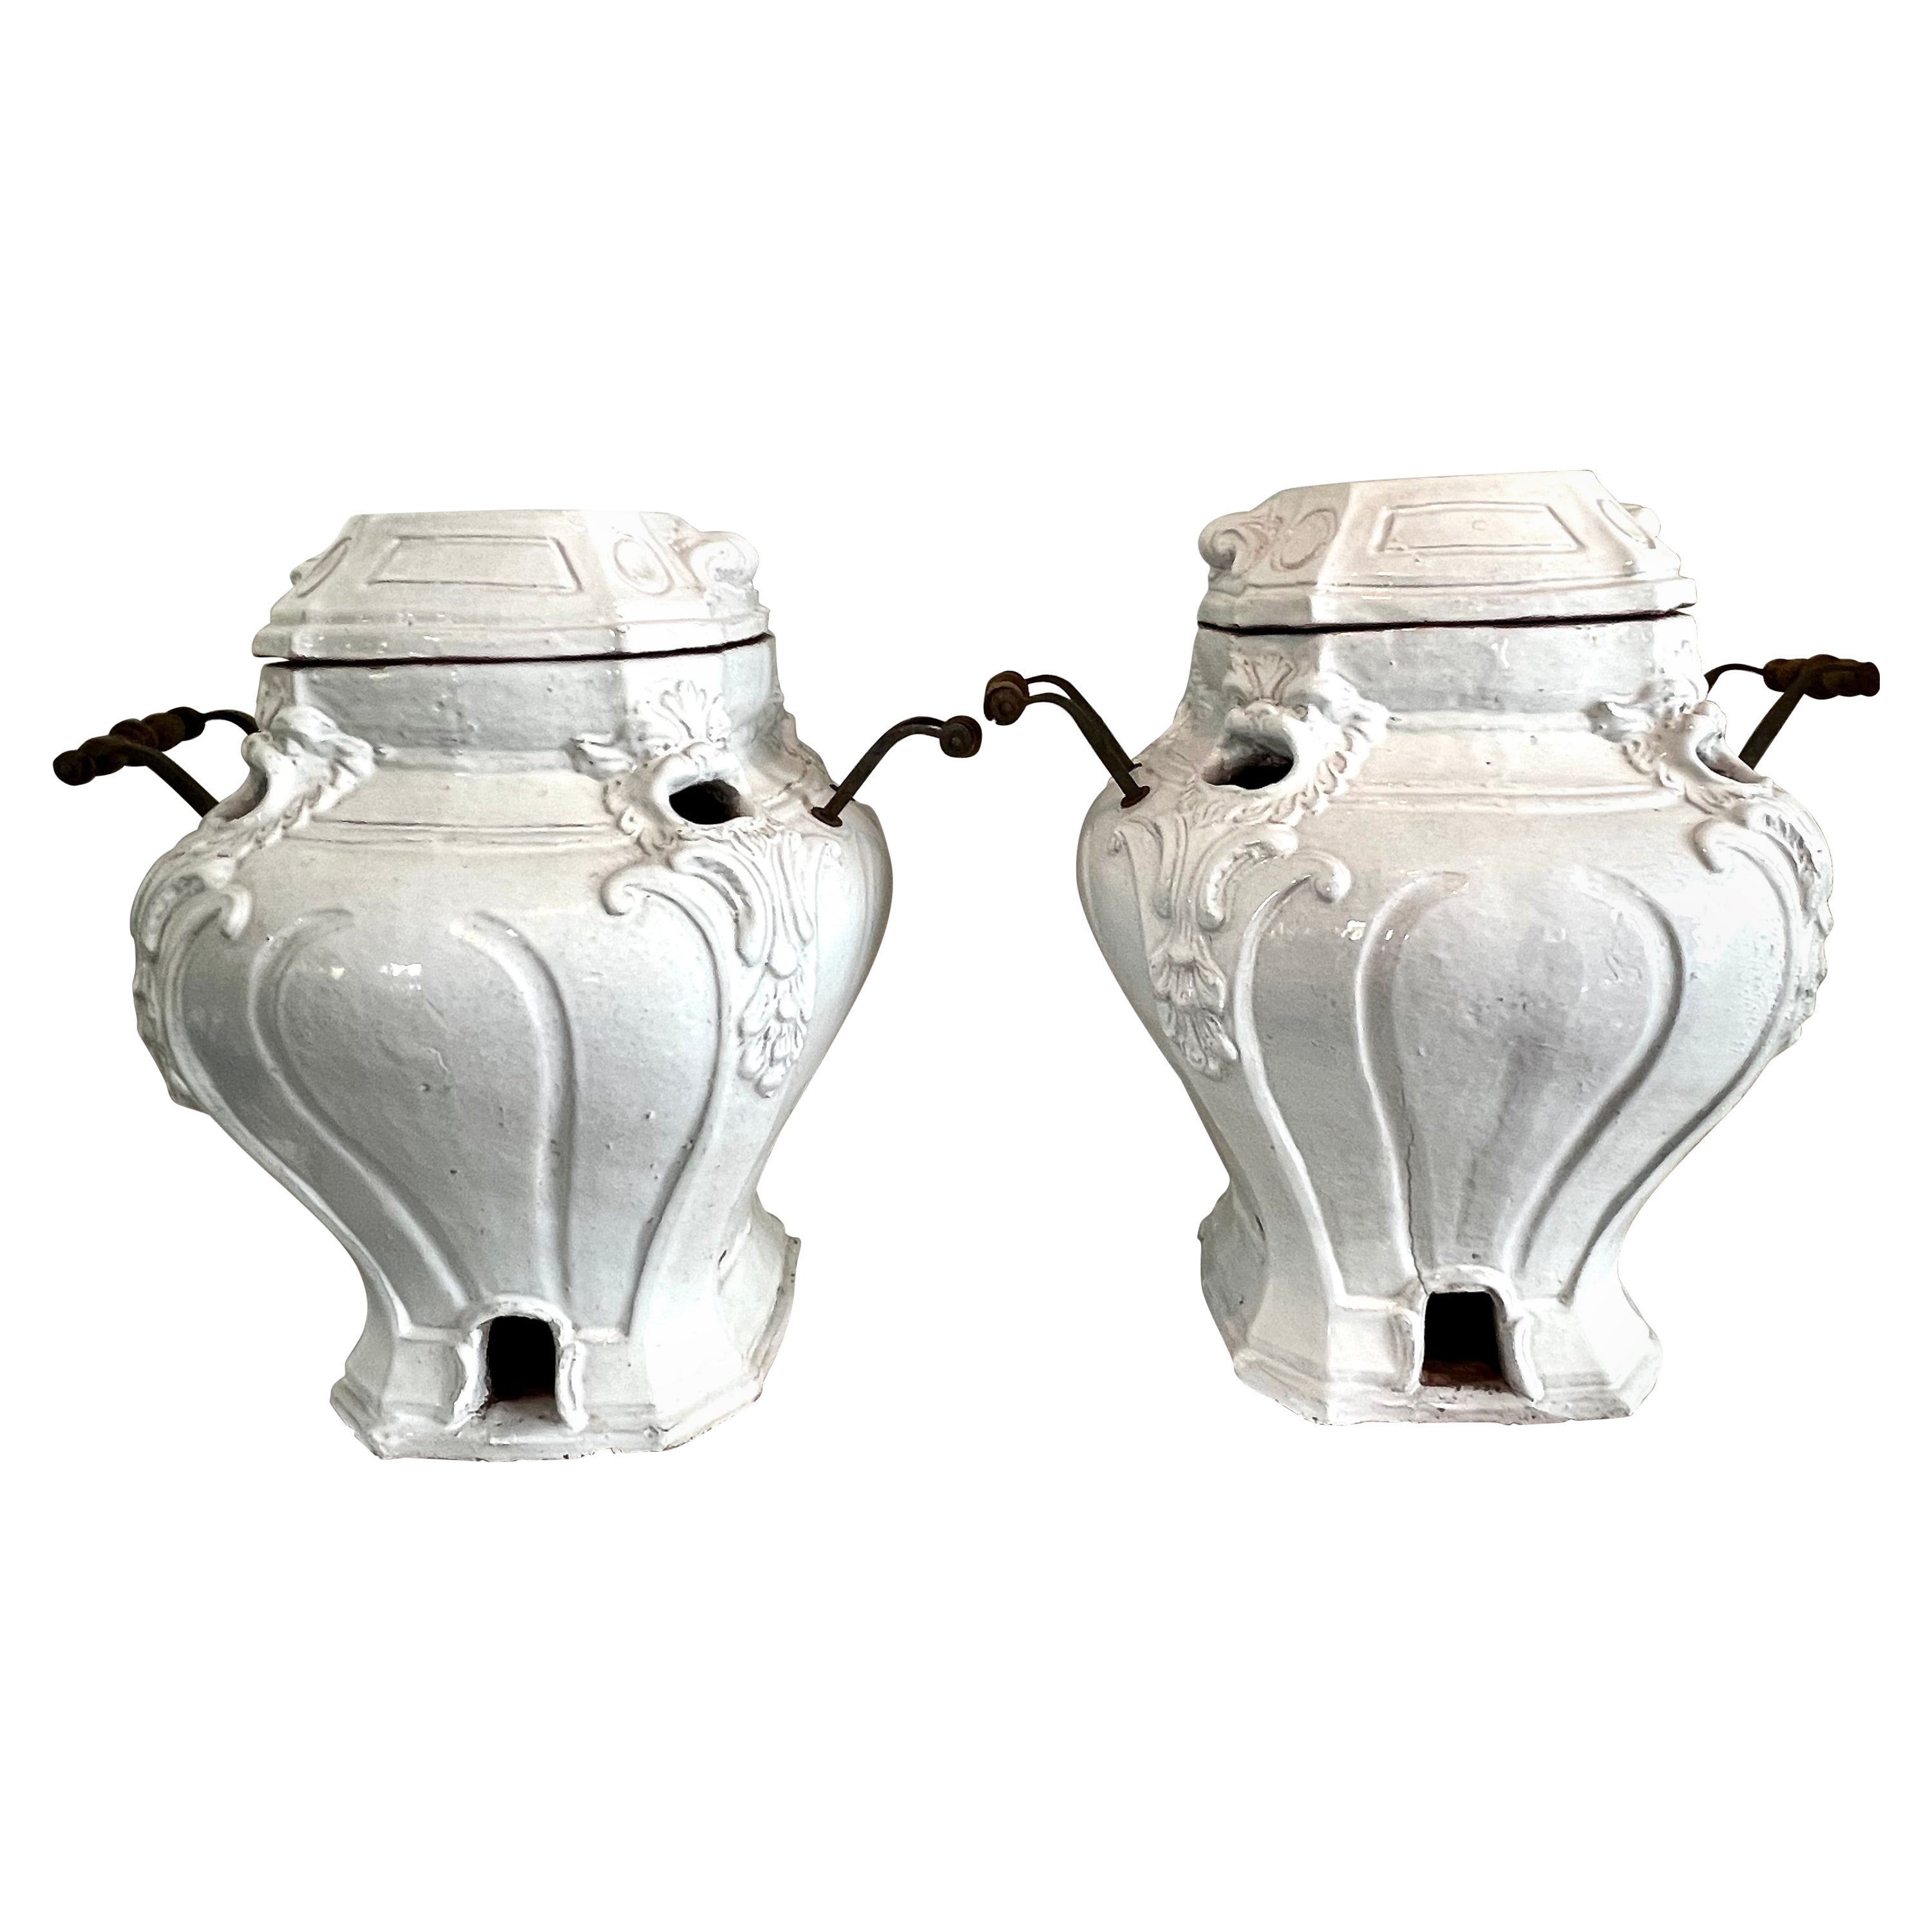 Pair of Glazed Terracotta Garden Urns or Jardinieres with Metal and Wood Handles For Sale